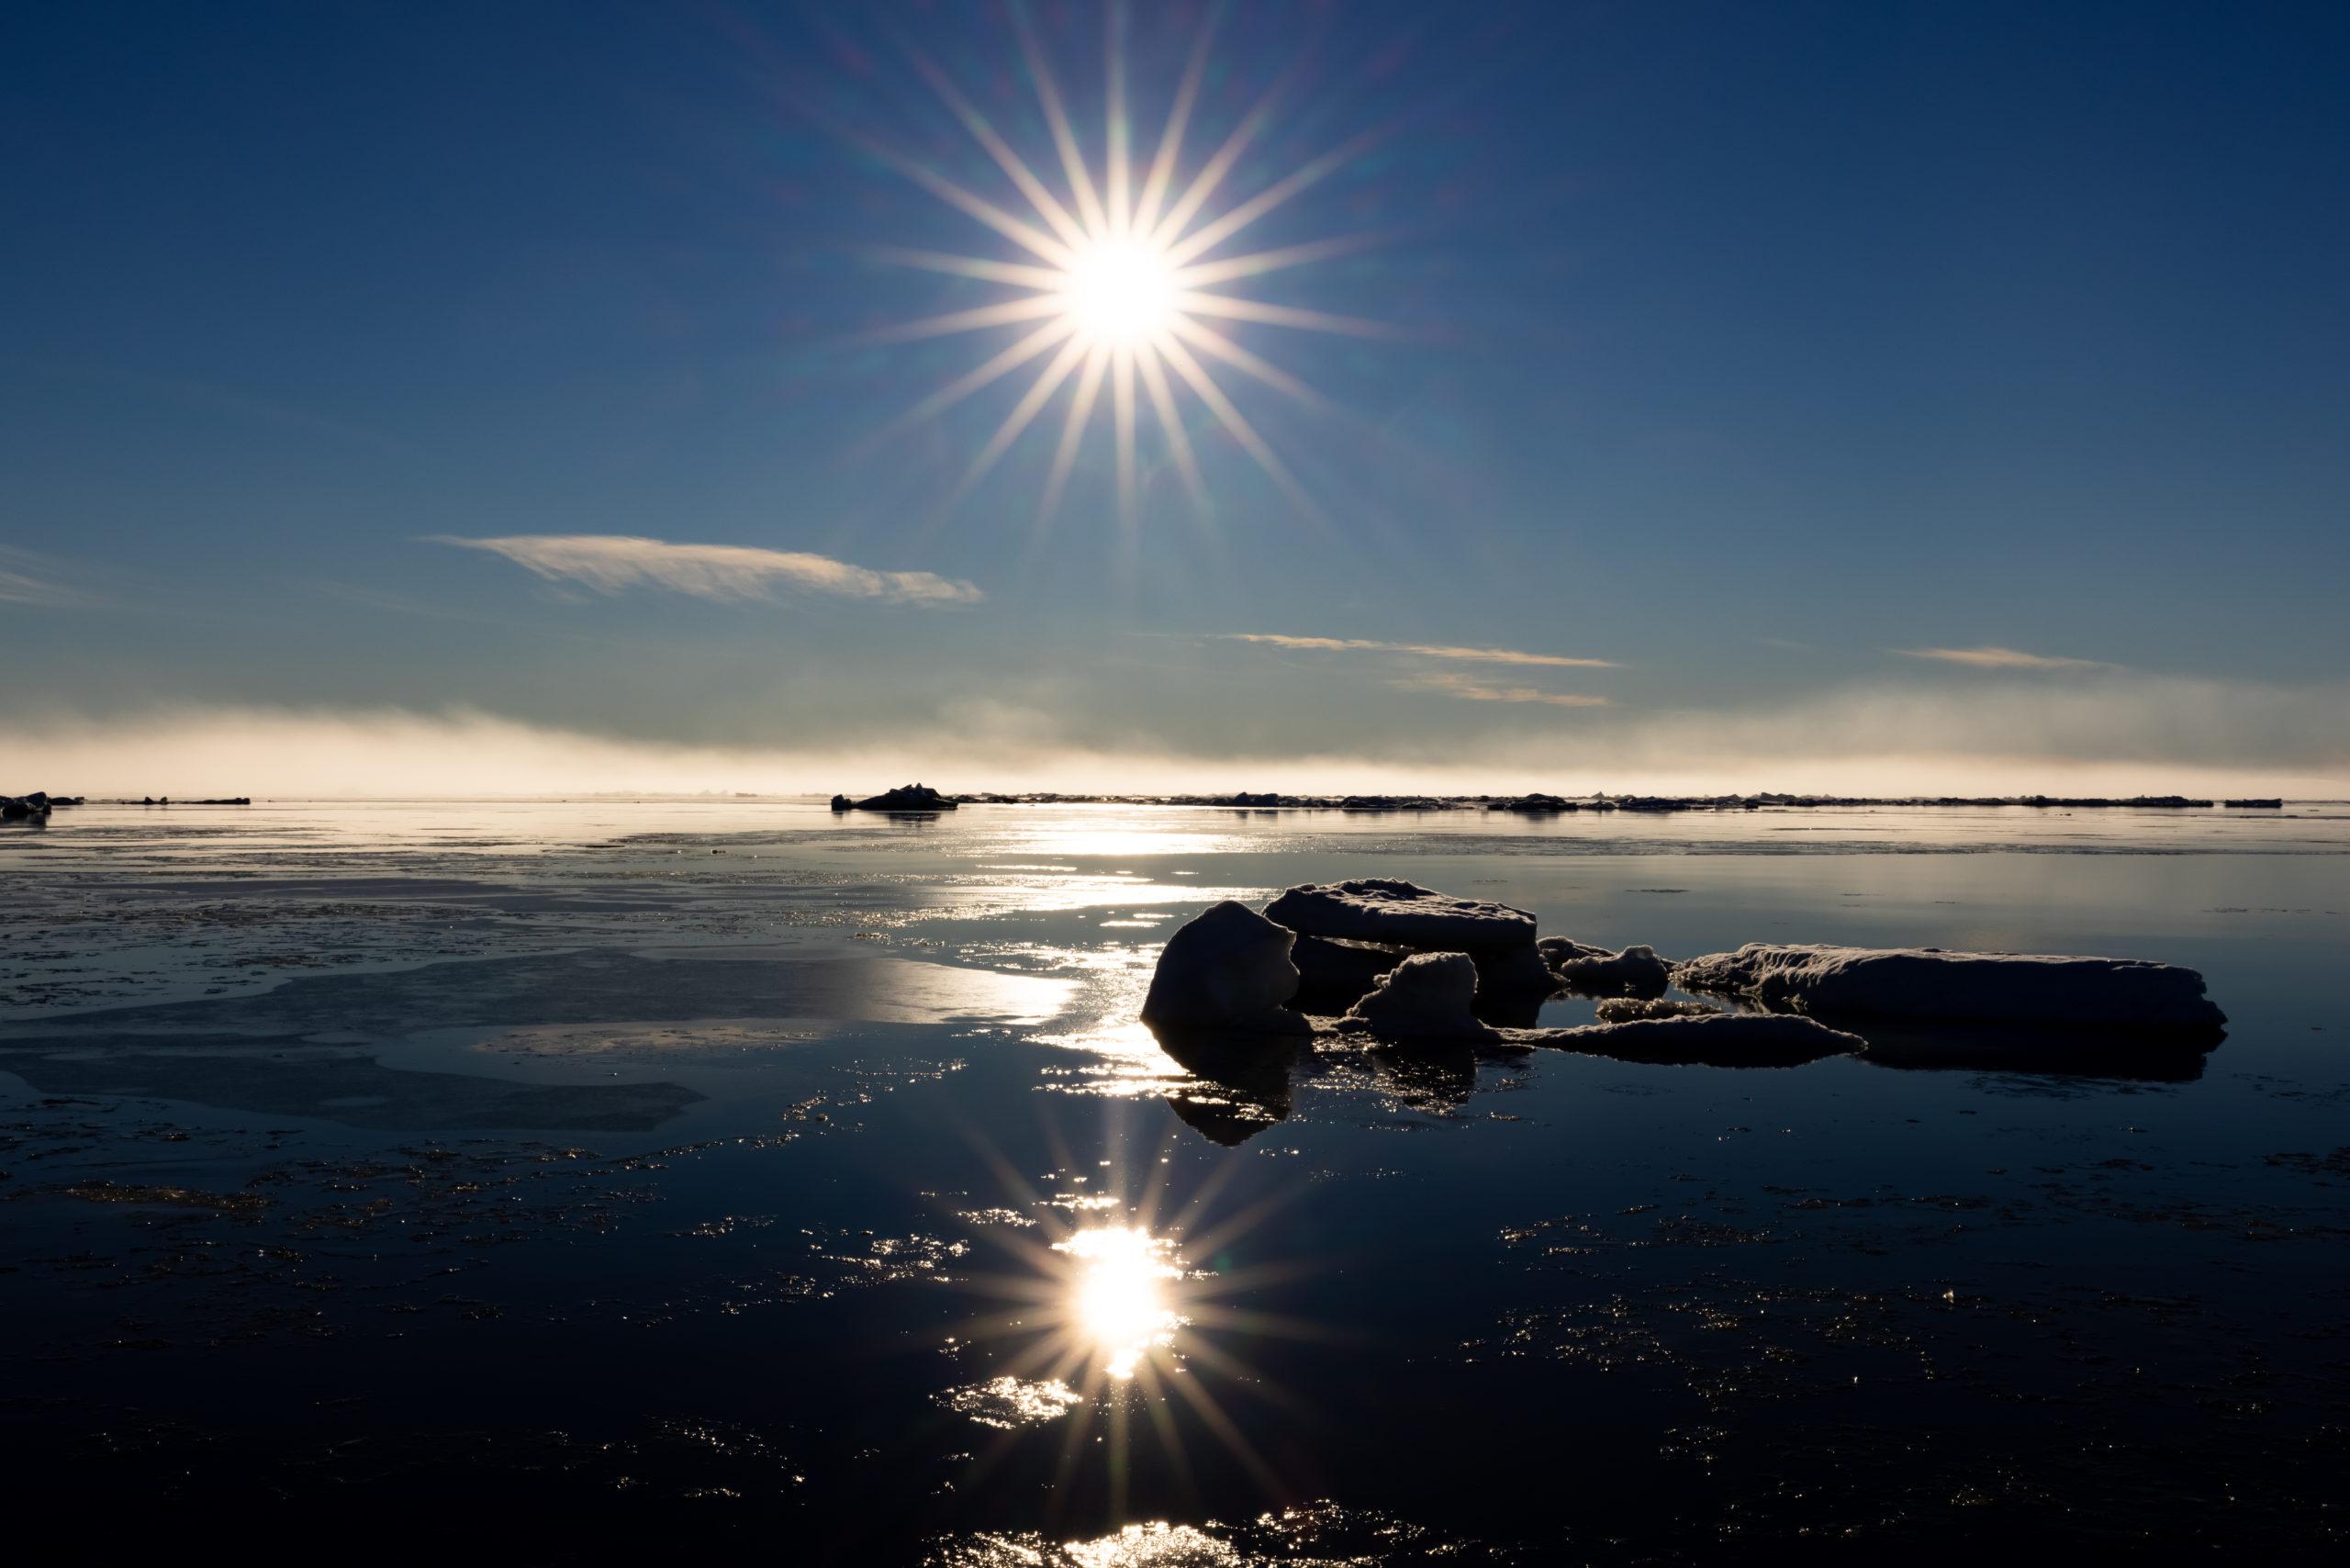 Sun over icy water